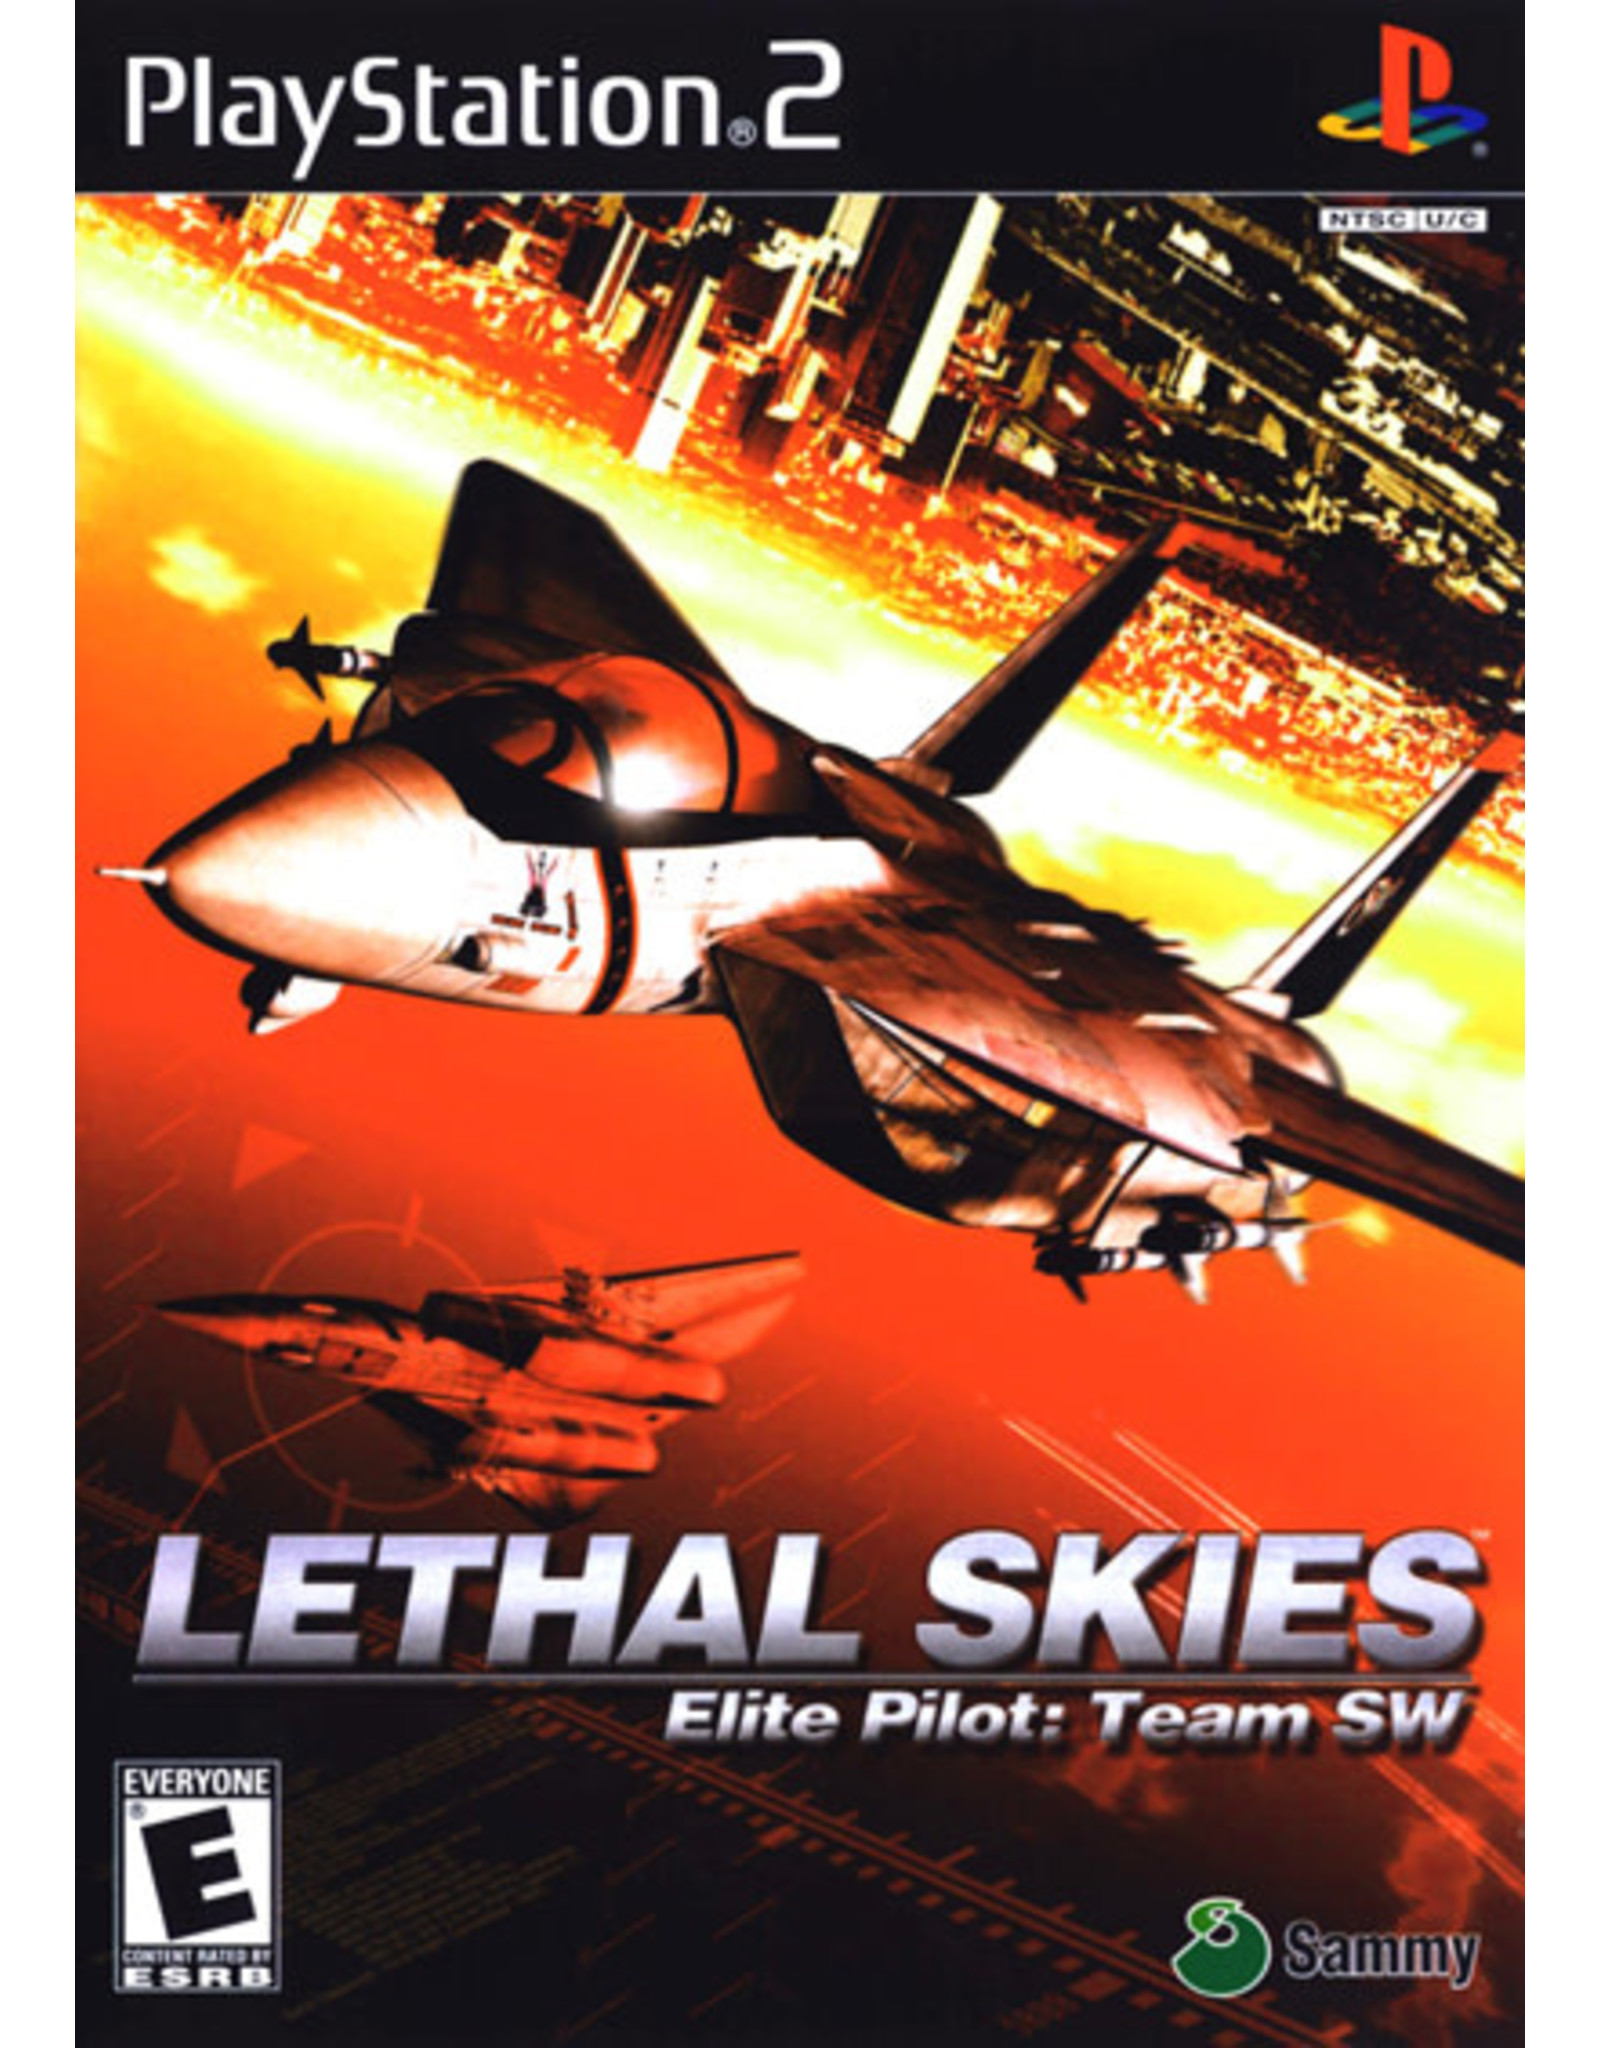 Playstation 2 Lethal Skies (No Manual, Sticker on Disc)